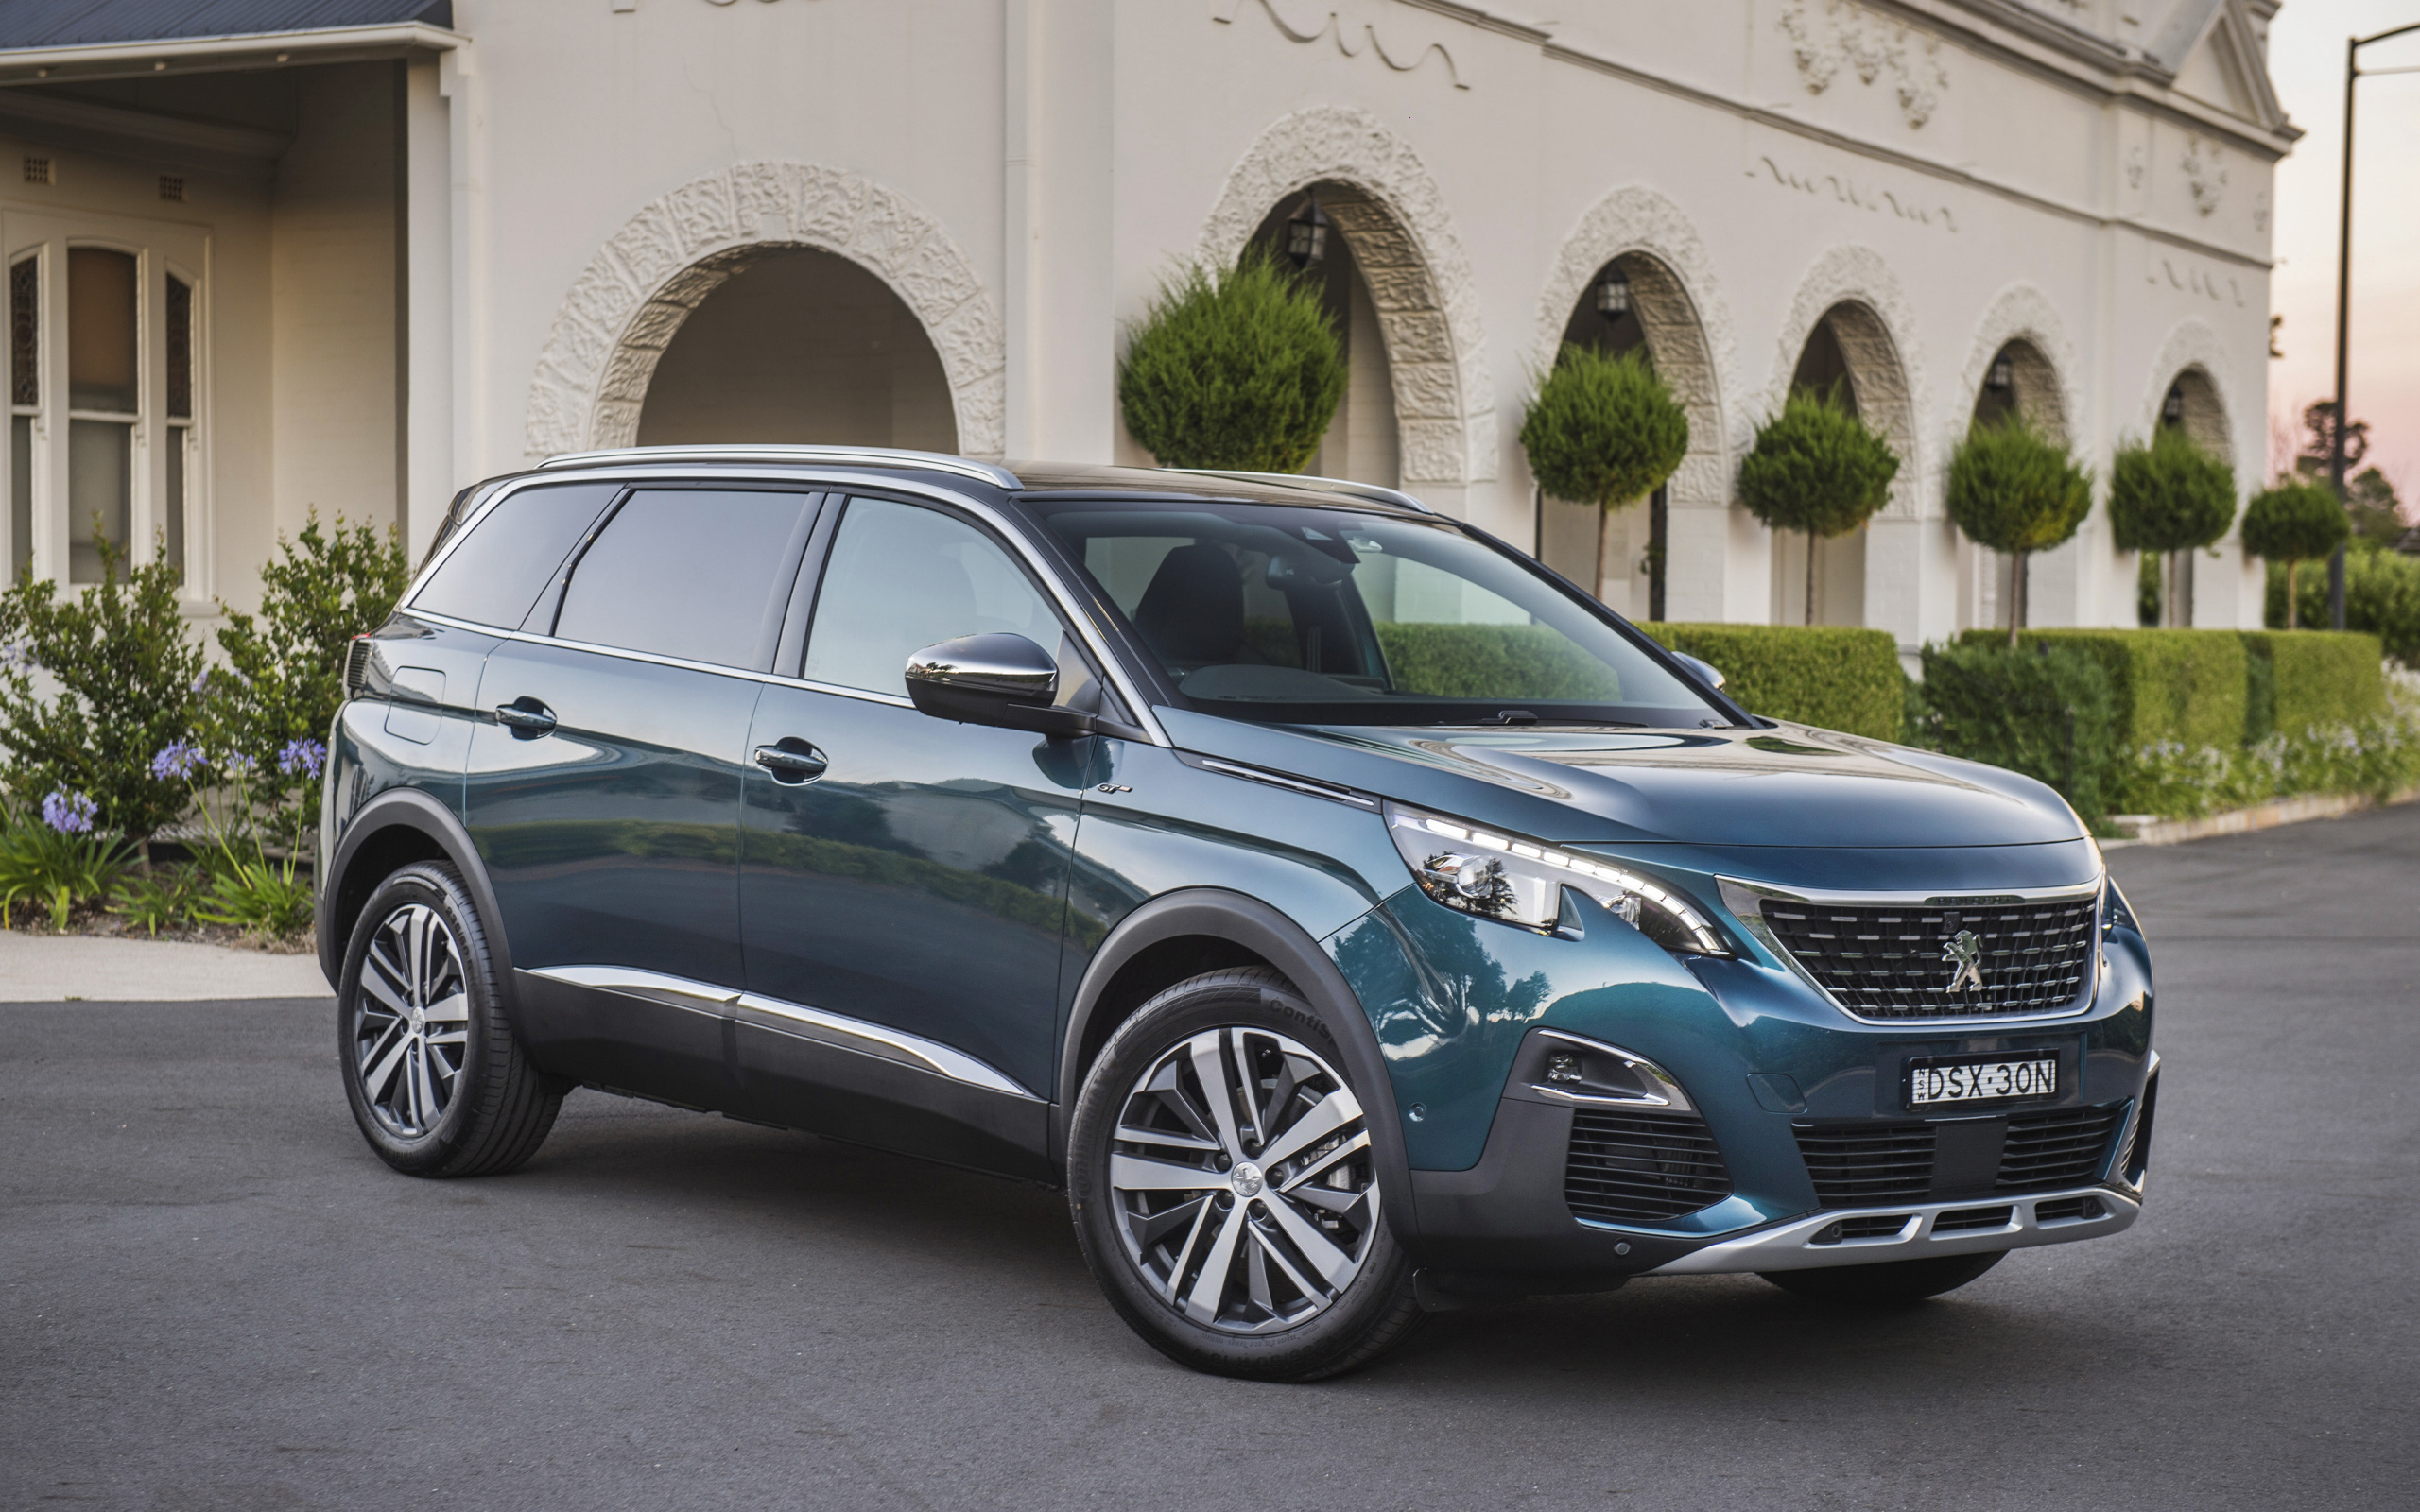 Peugeot 5008 GT, 2018 on the background of the building